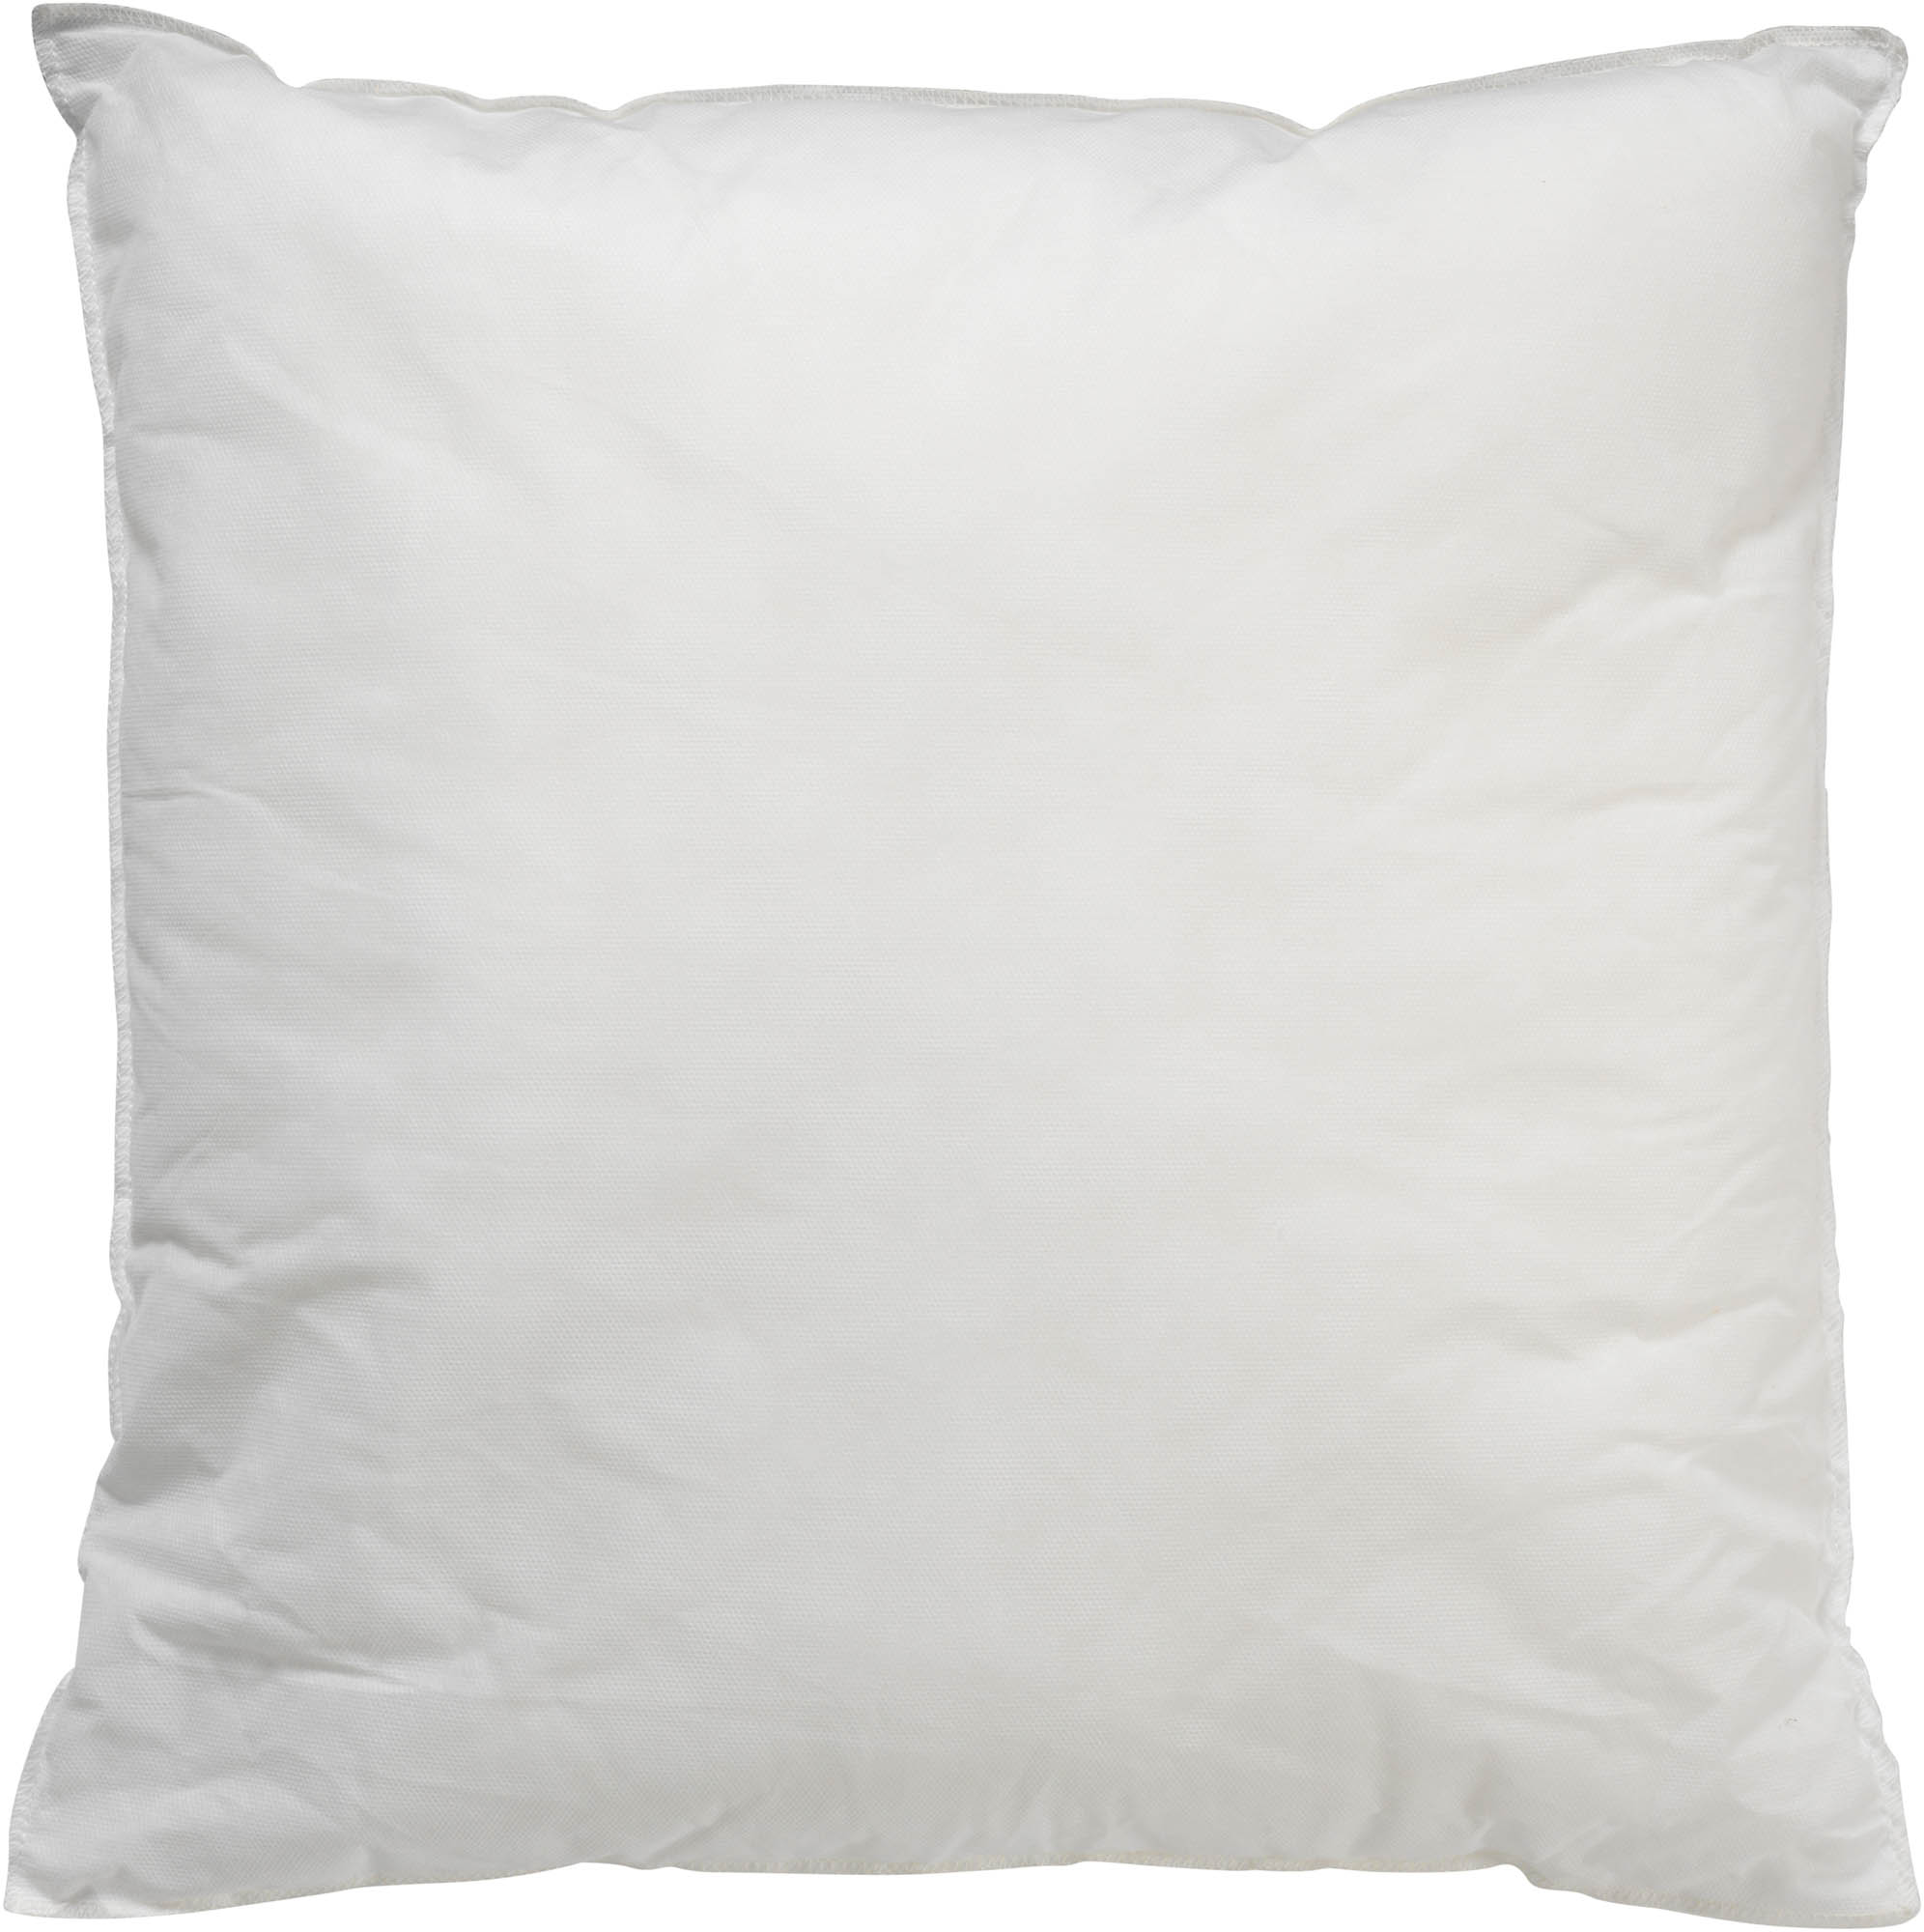 Inner cushion 45x45 cm with polyester filling 345 gram